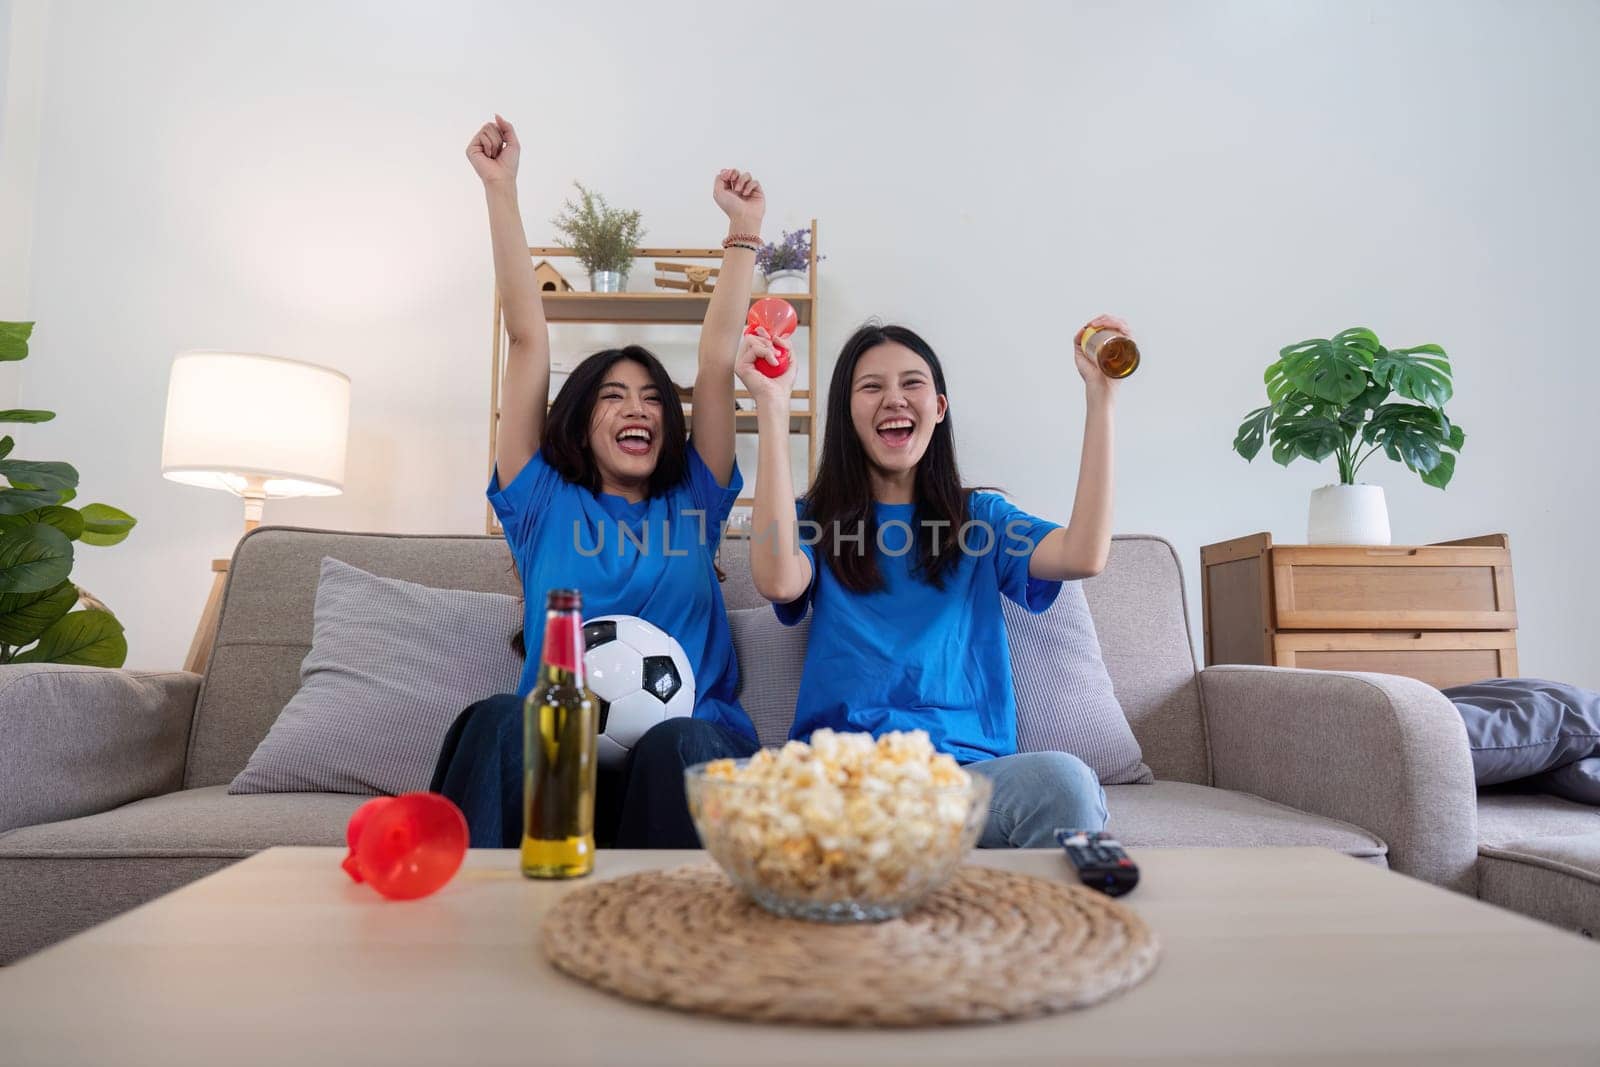 Lesbian couple cheering for Euro football with drinks and popcorn at home. Concept of sports enthusiasm and LGBTQ pride.